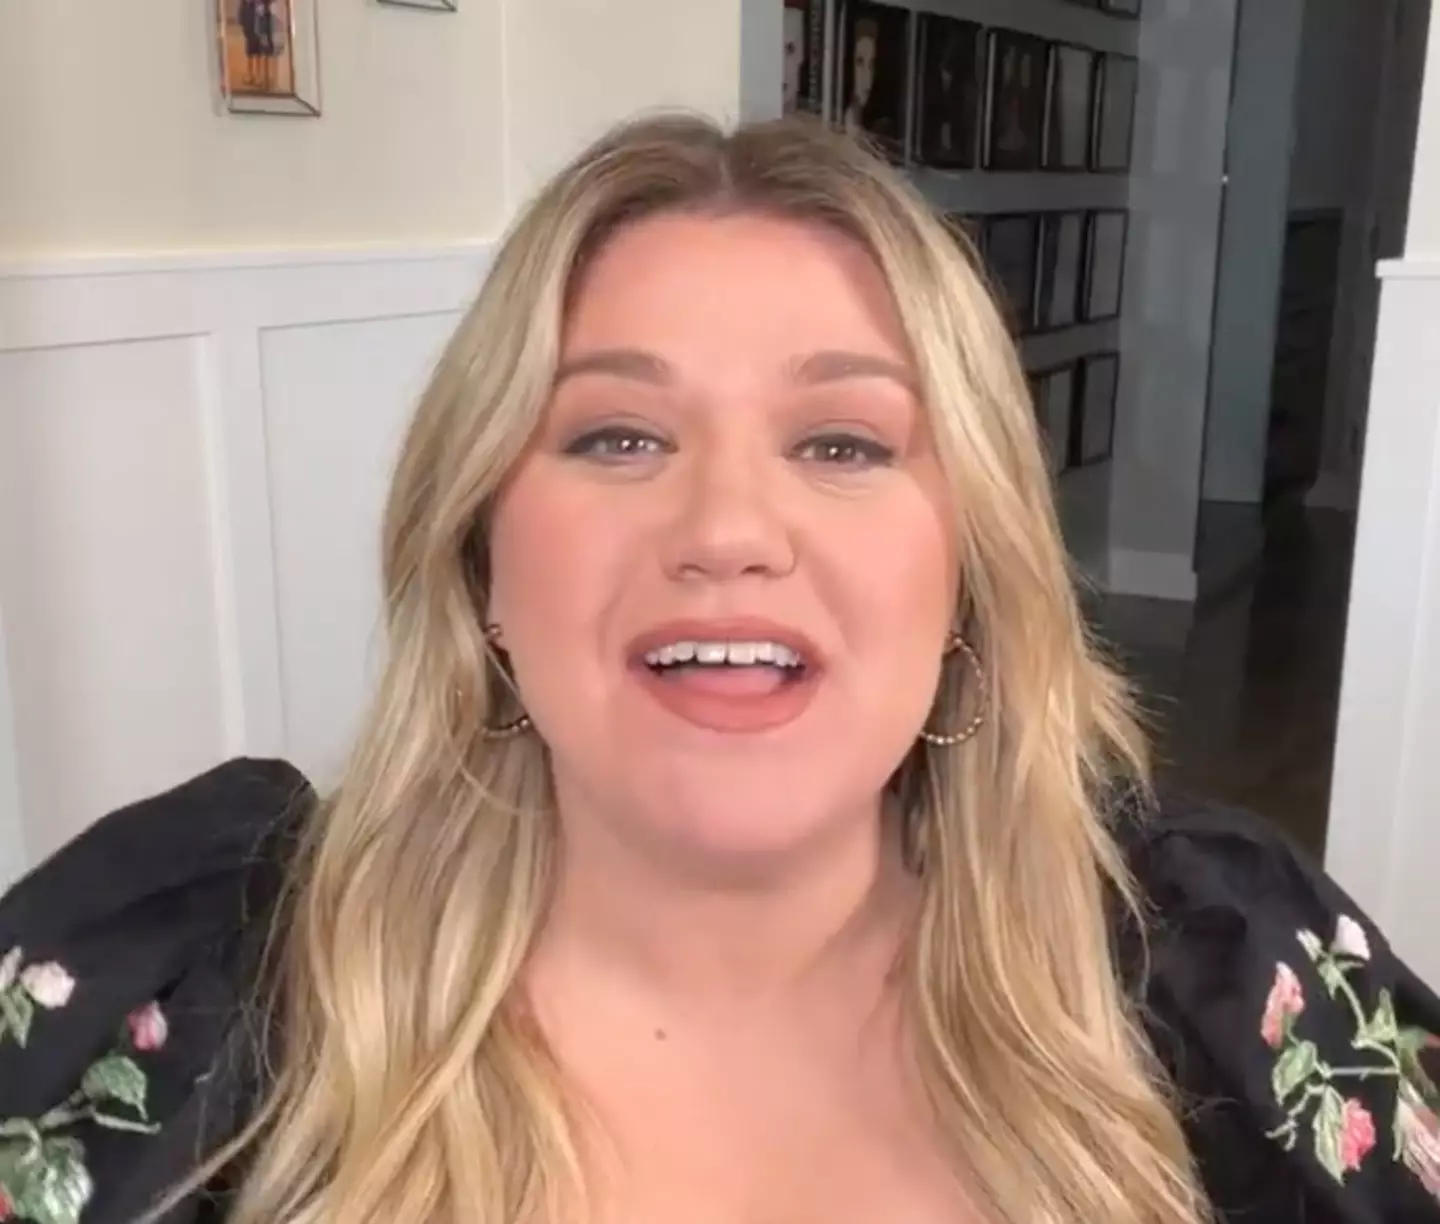 Kelly Clarkson has taken to Instagram to respond to the controversy.